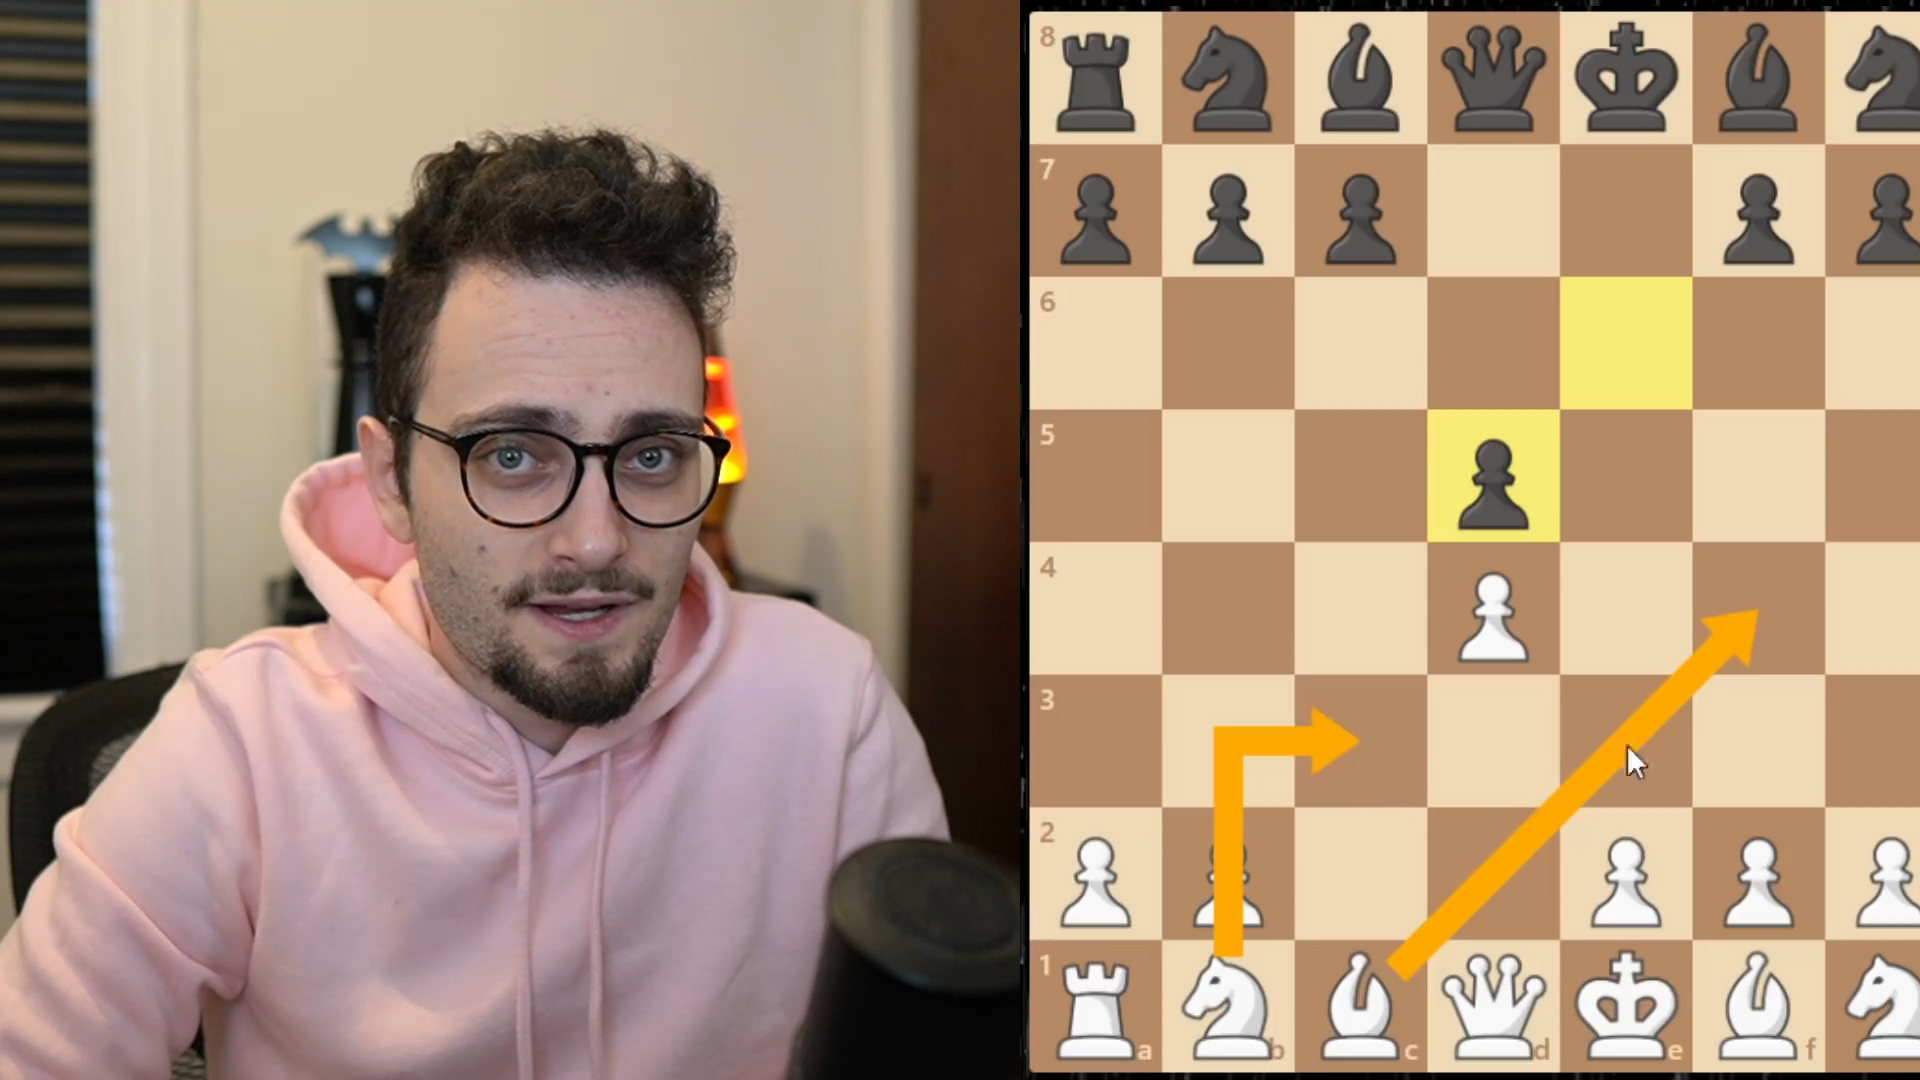 Levy Reacts To TikTok Chess 